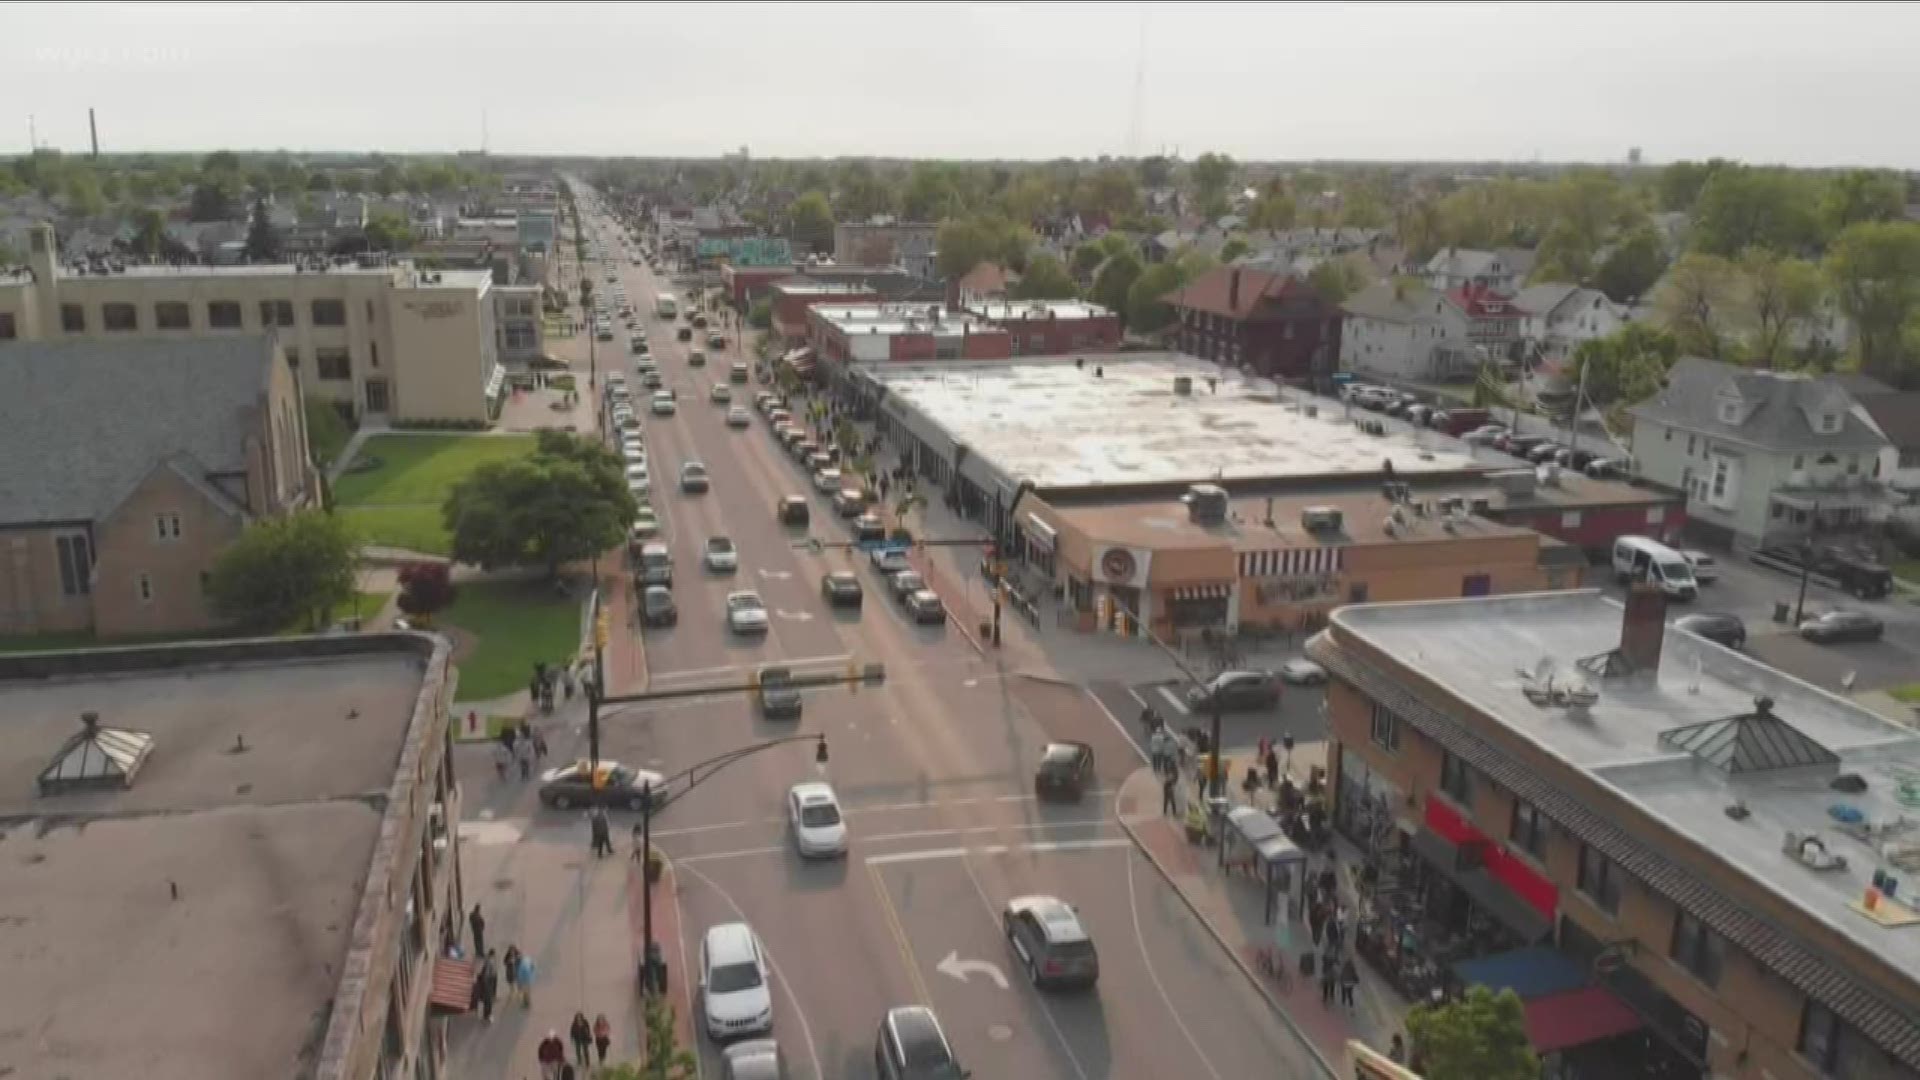 The video also touches on the unique neighborhoods and thriving Hertel Avenue businesses...